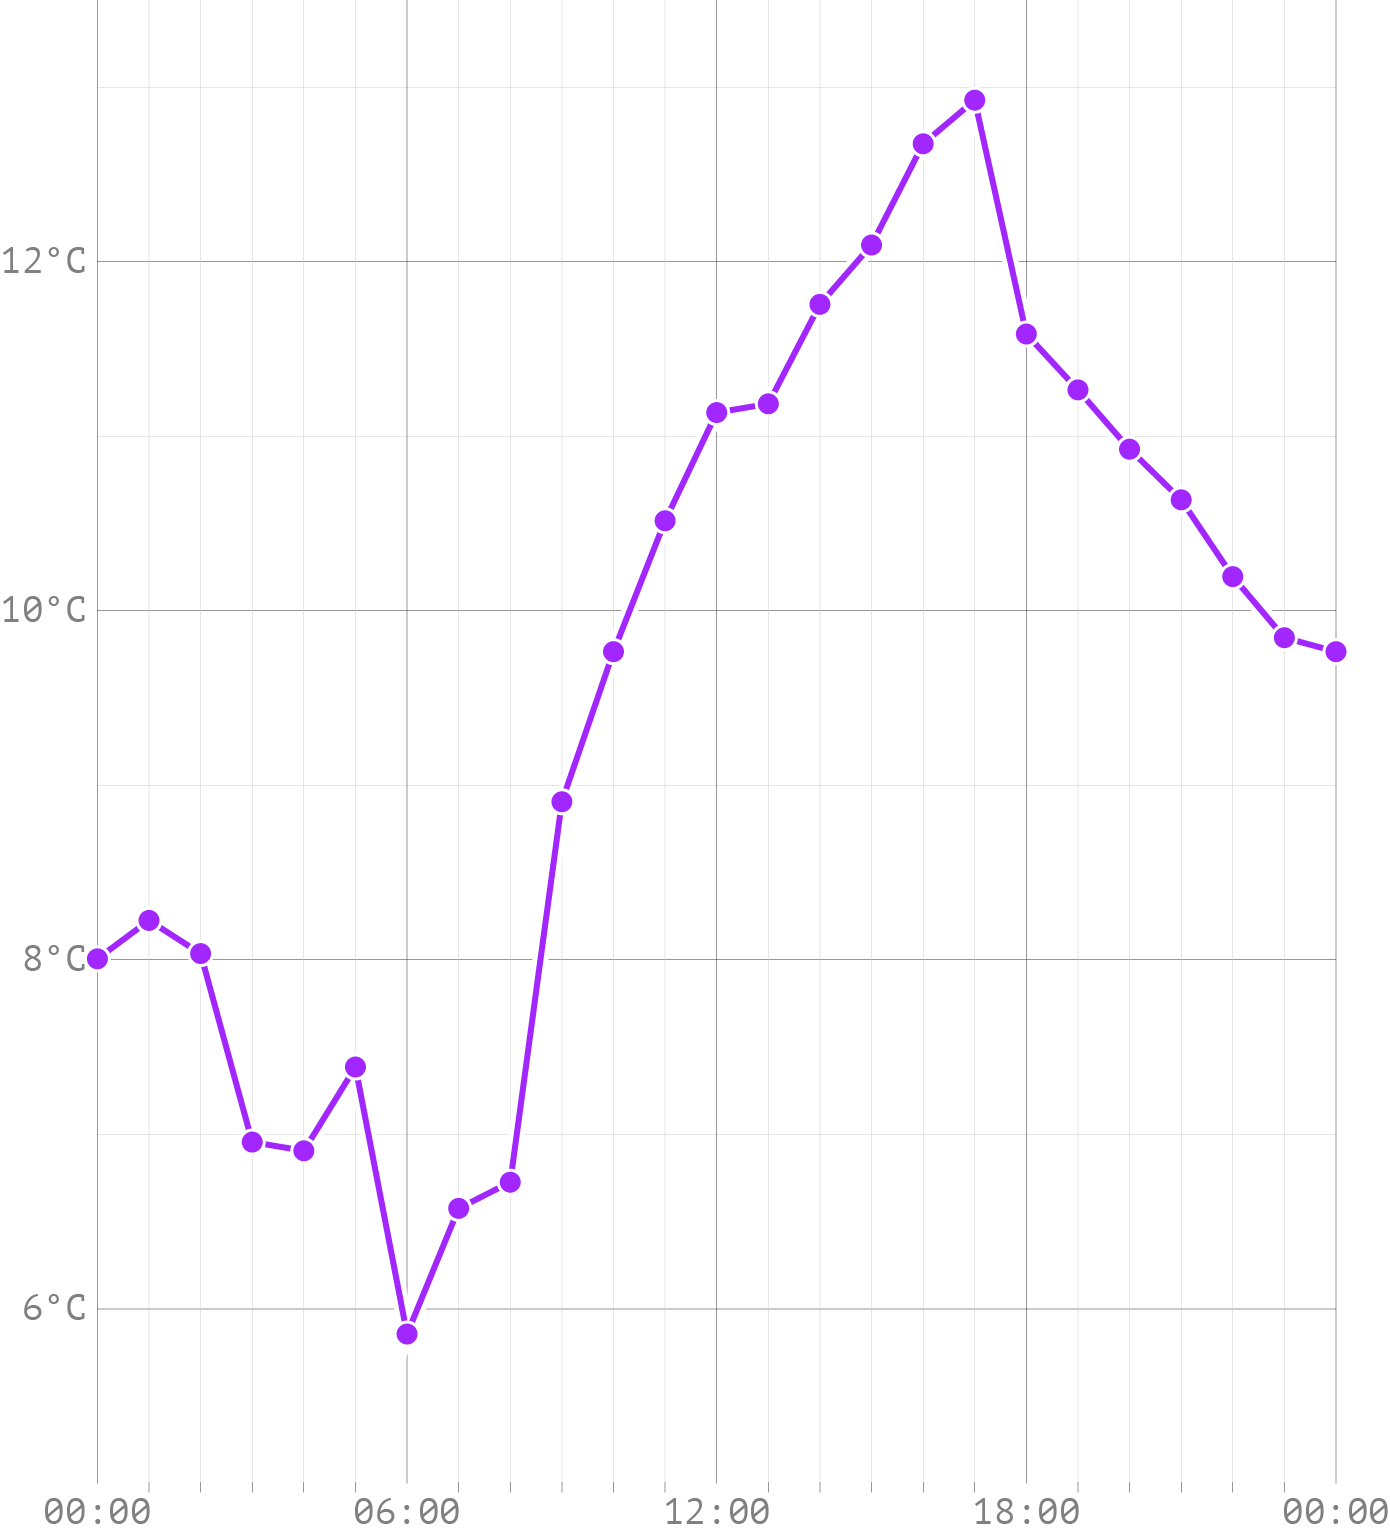 The same line chart as above, with the data points plotted on top of the line